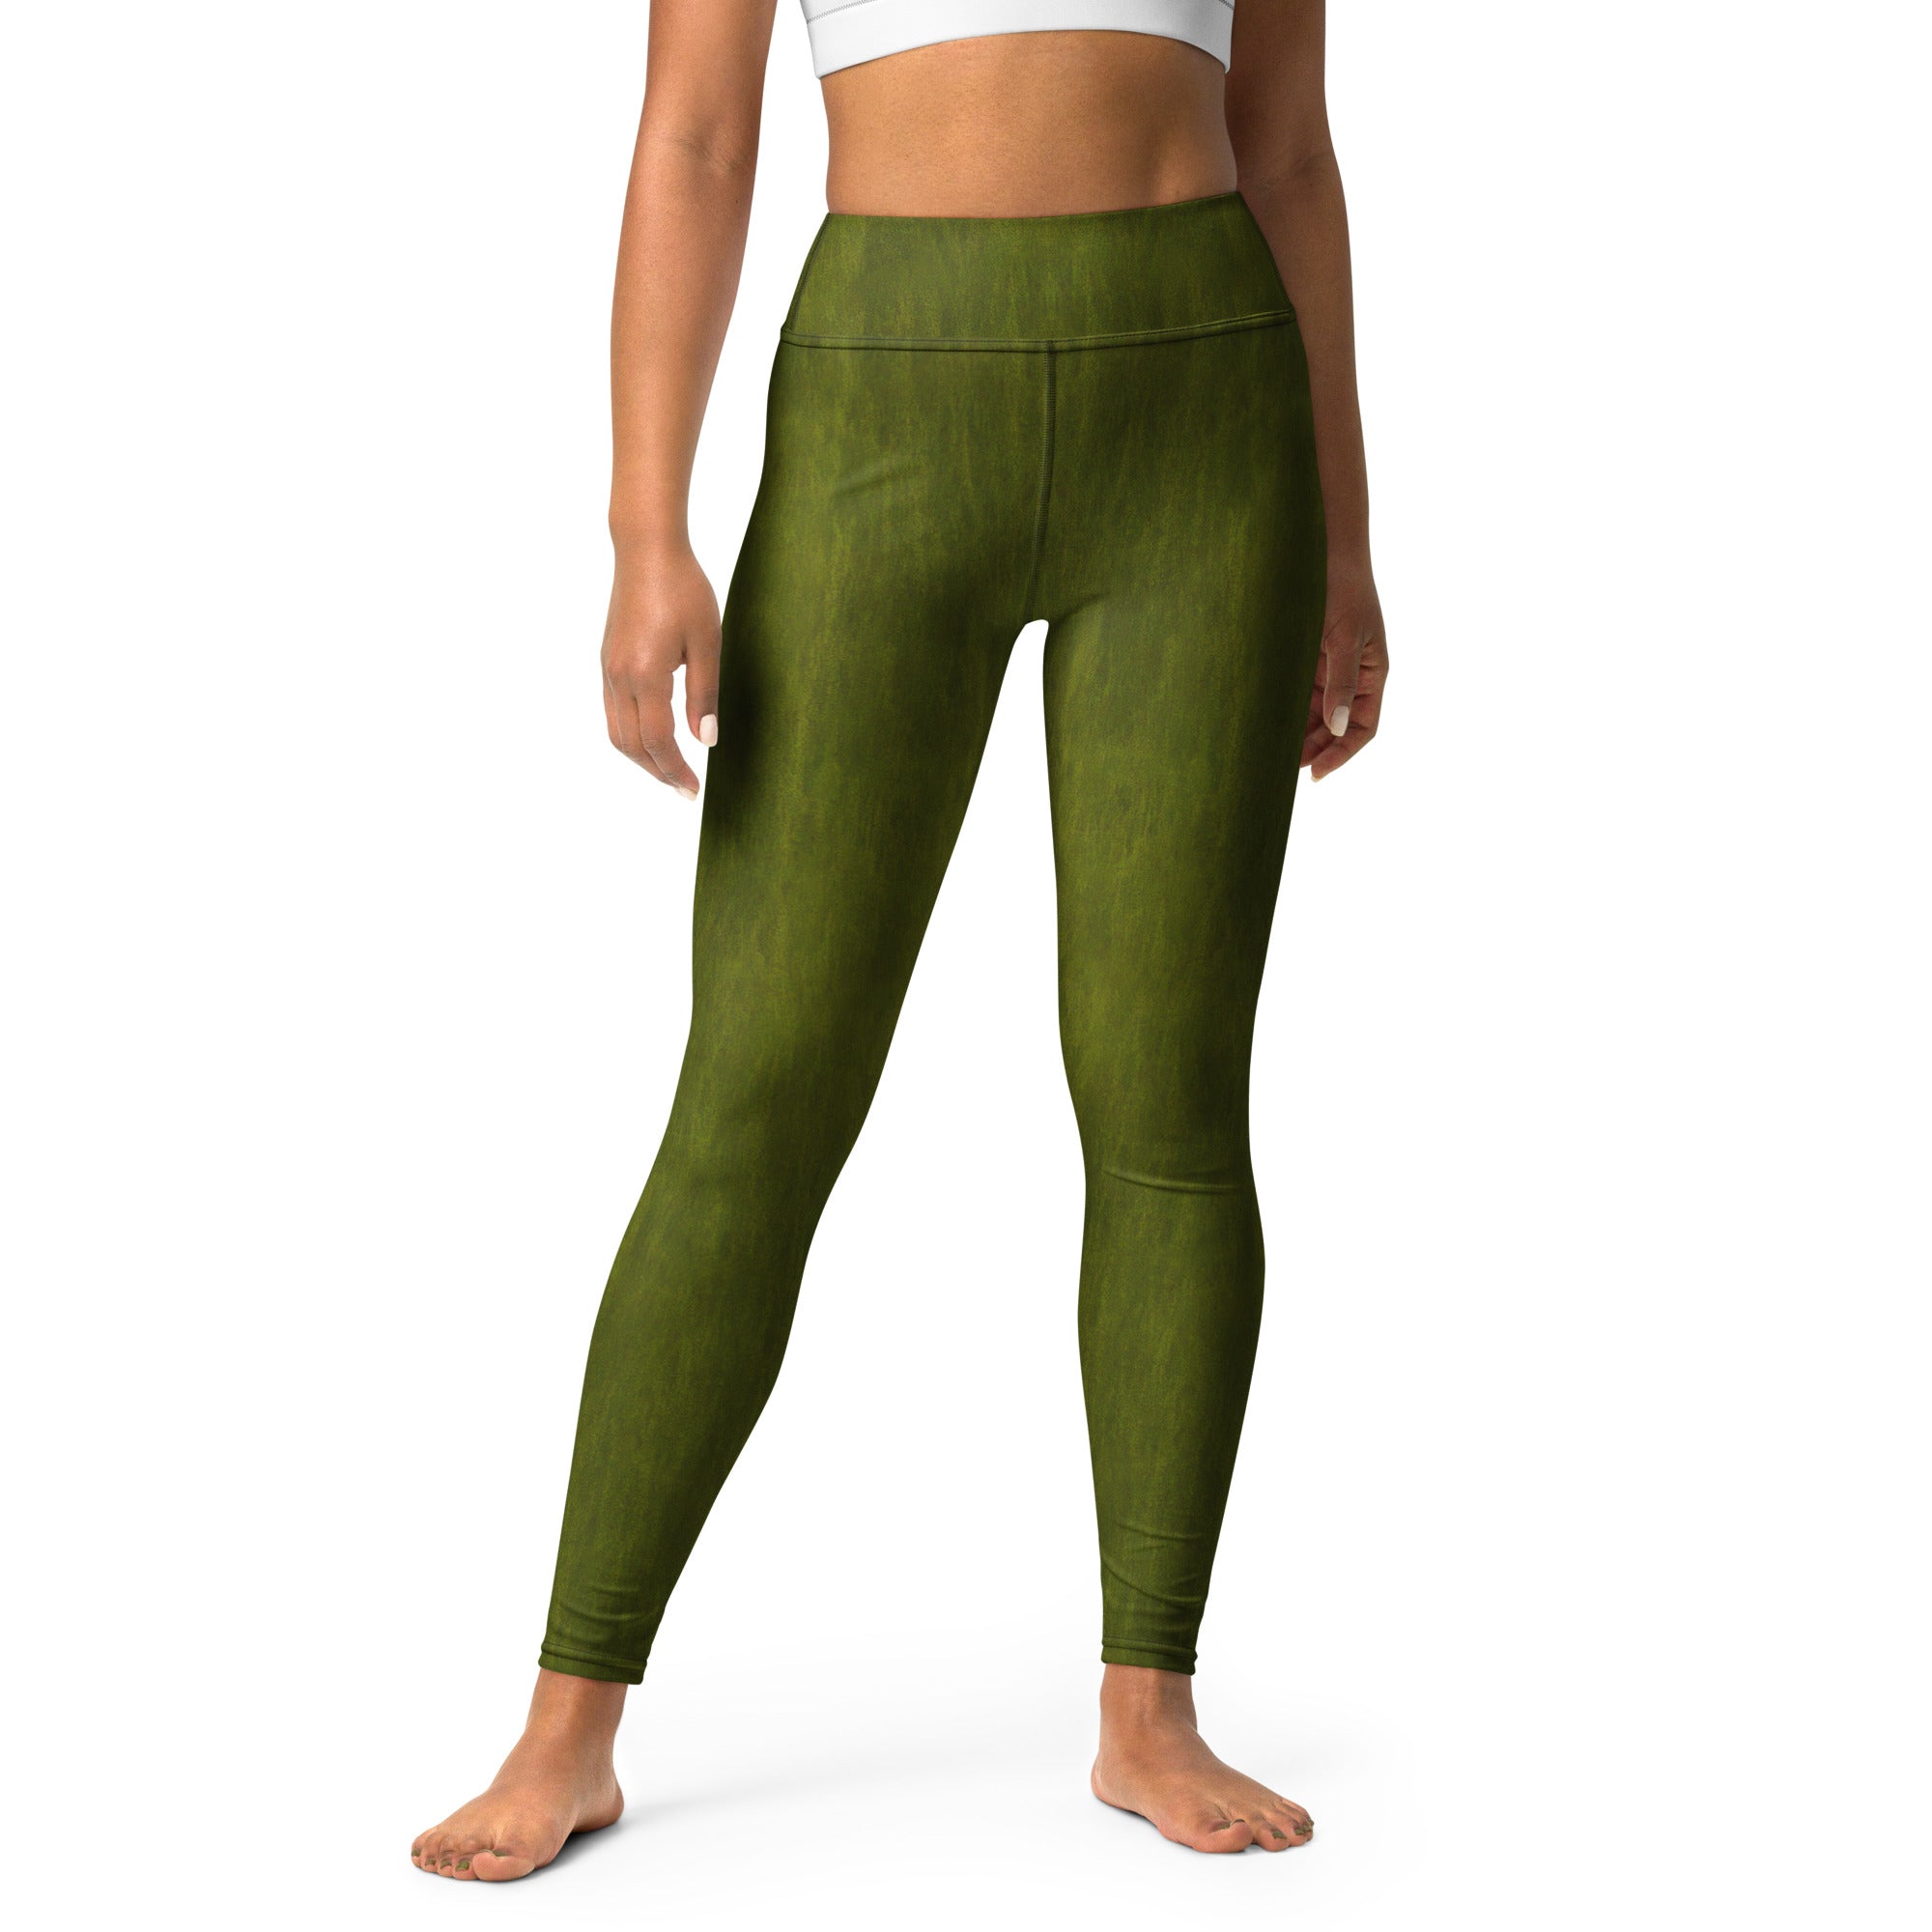 High-Quality Bronze Finish Yoga Leggings with Stretch Fit